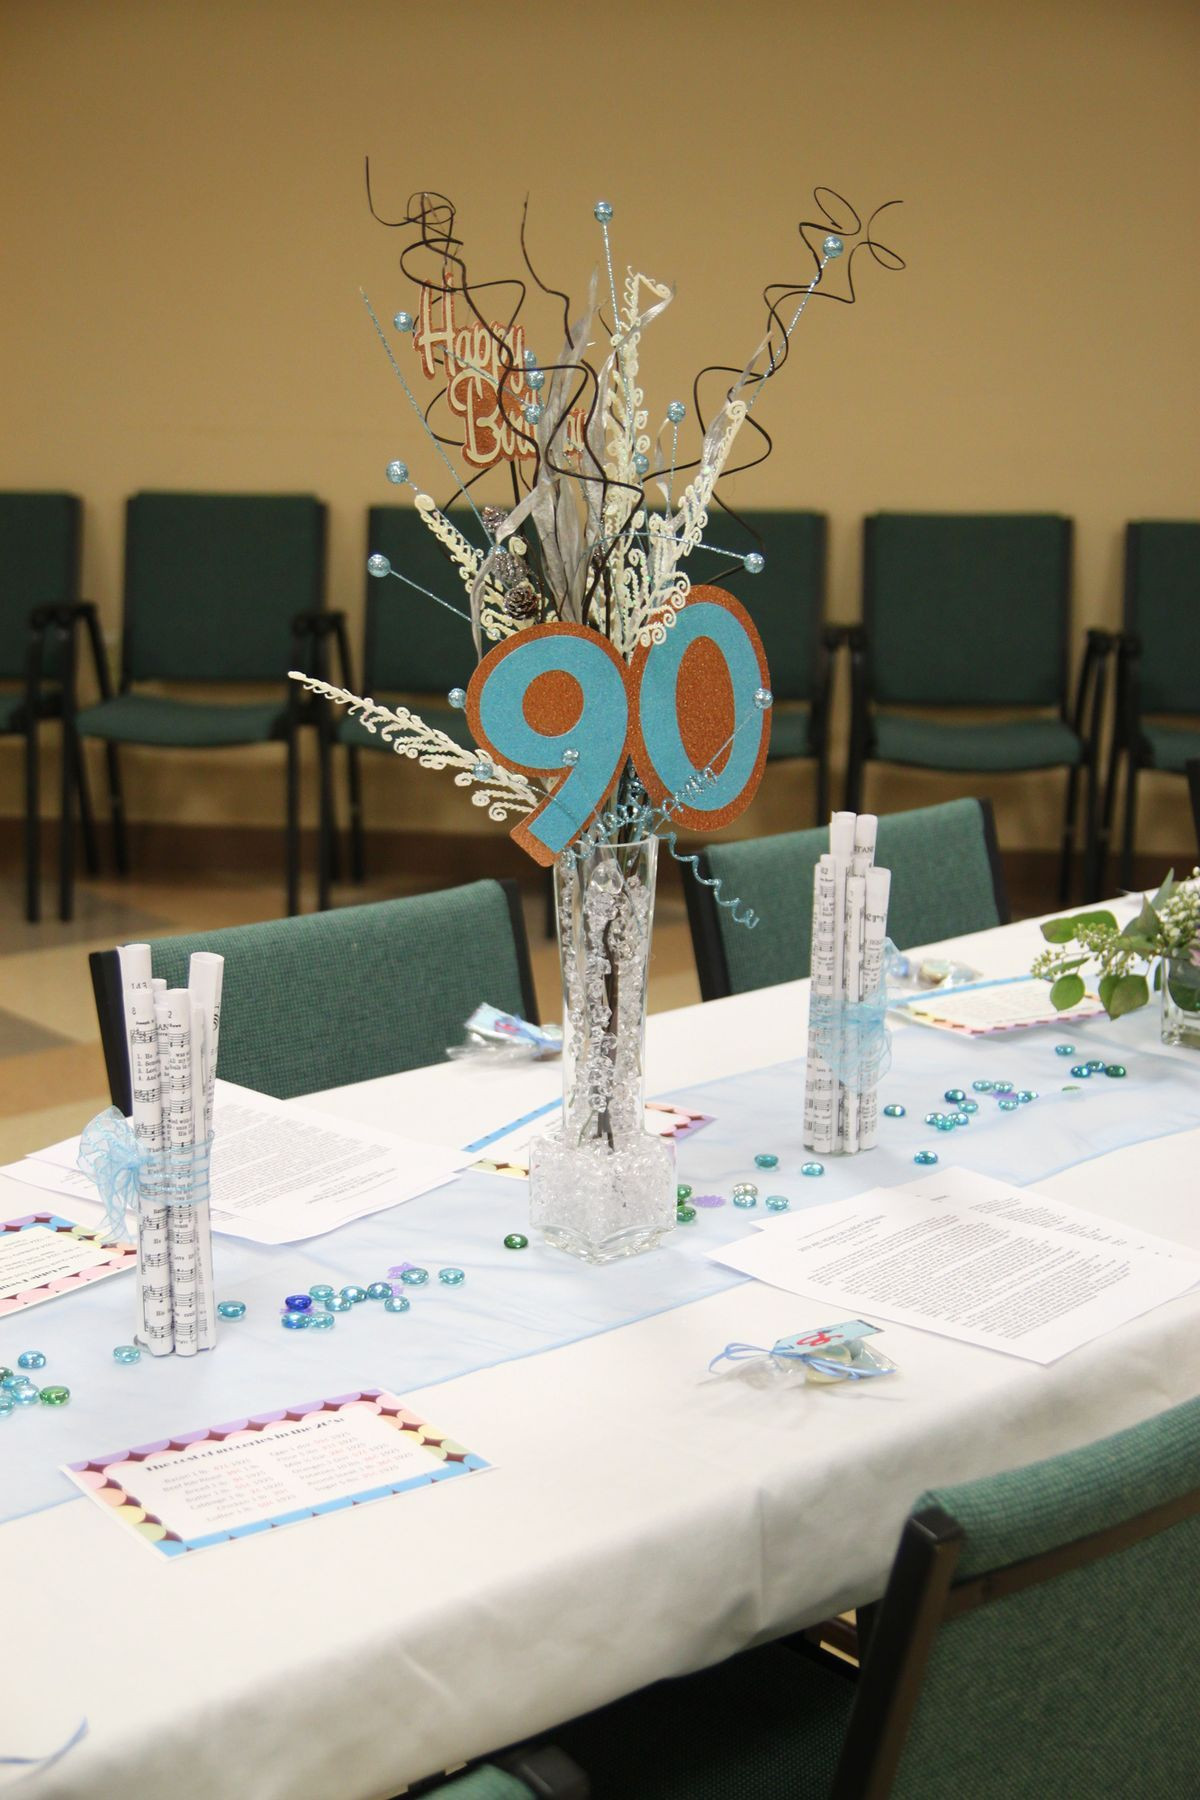 90th Birthday Party Ideas
 Pin by Yvonne Farraway on Crafts